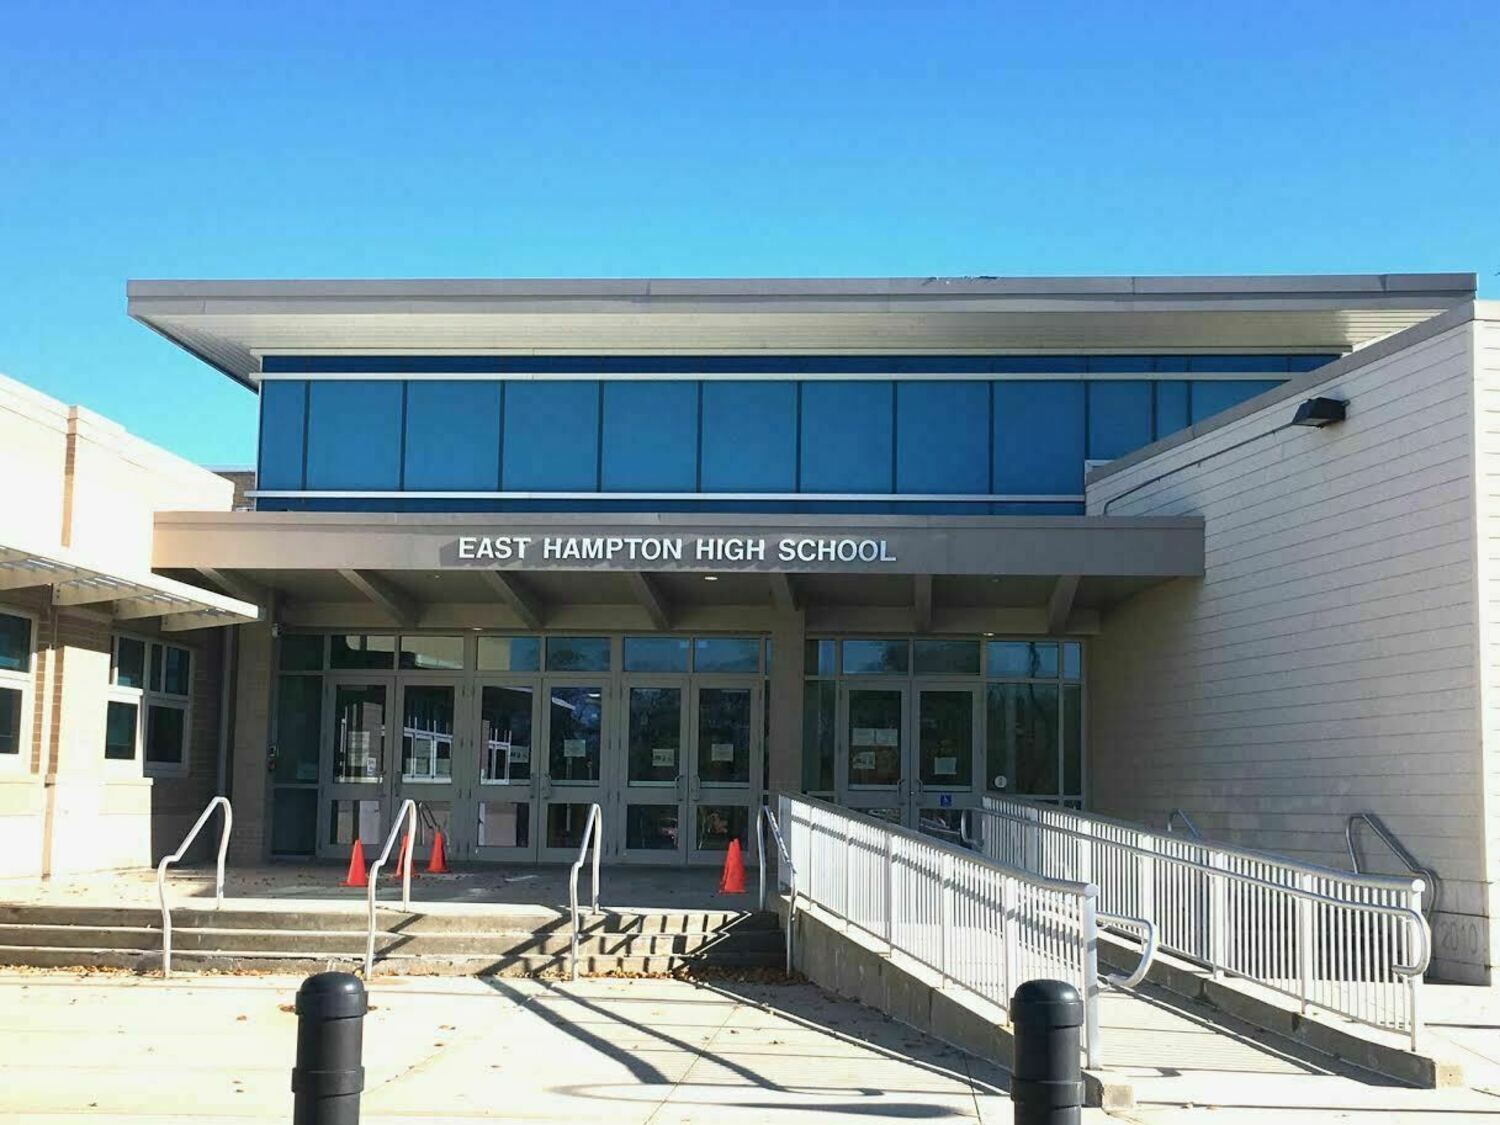 An energy performance contract is being proposed to install solar-paneled carports, using energy savings from the project to offset the costs of necessary infrastructure upgrades at the elementary and middle schools. FILE PHOTO